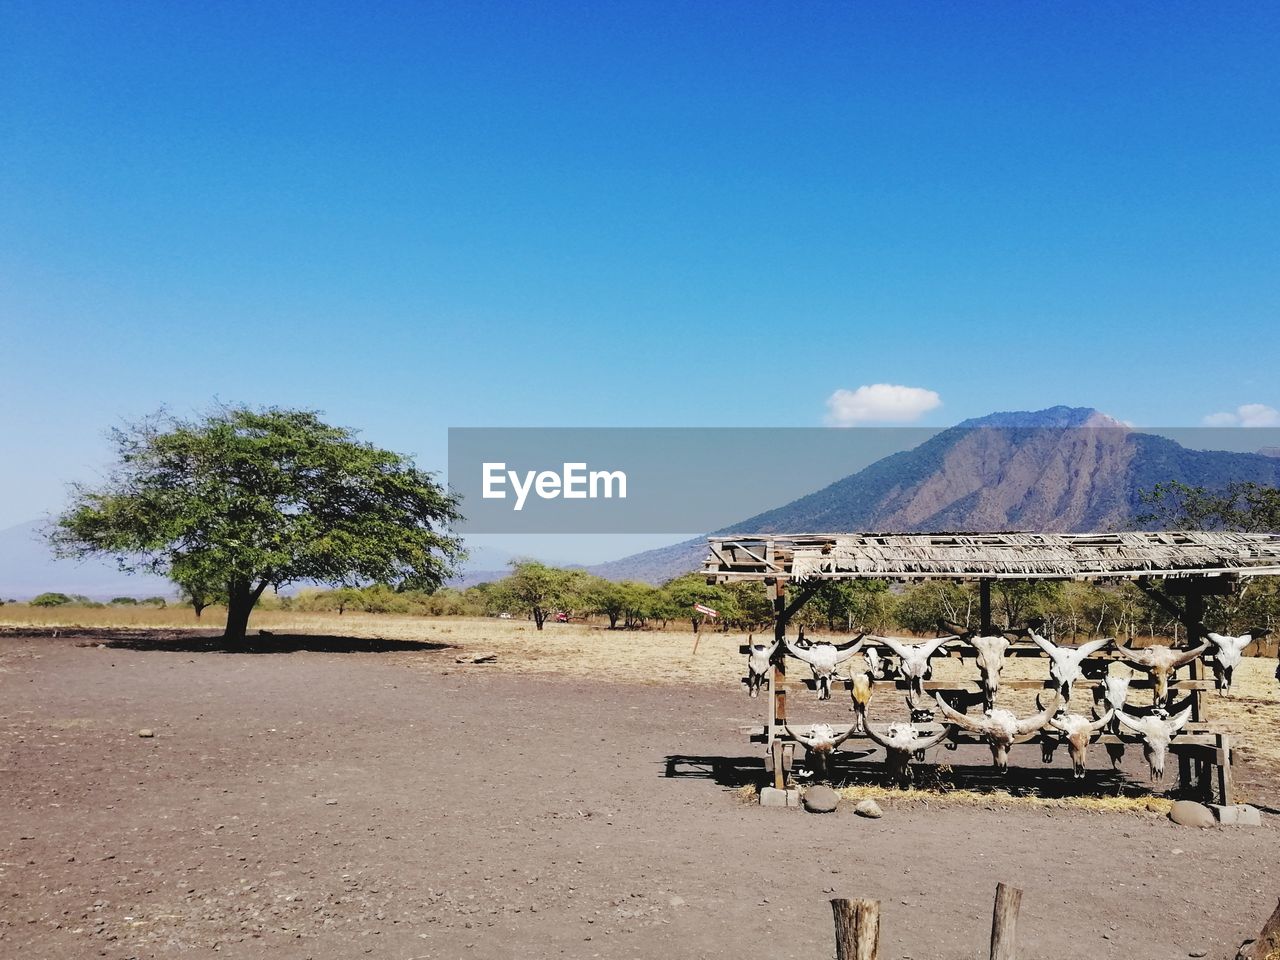 The park is a rough circle with the extinct volcano baluran at its centre